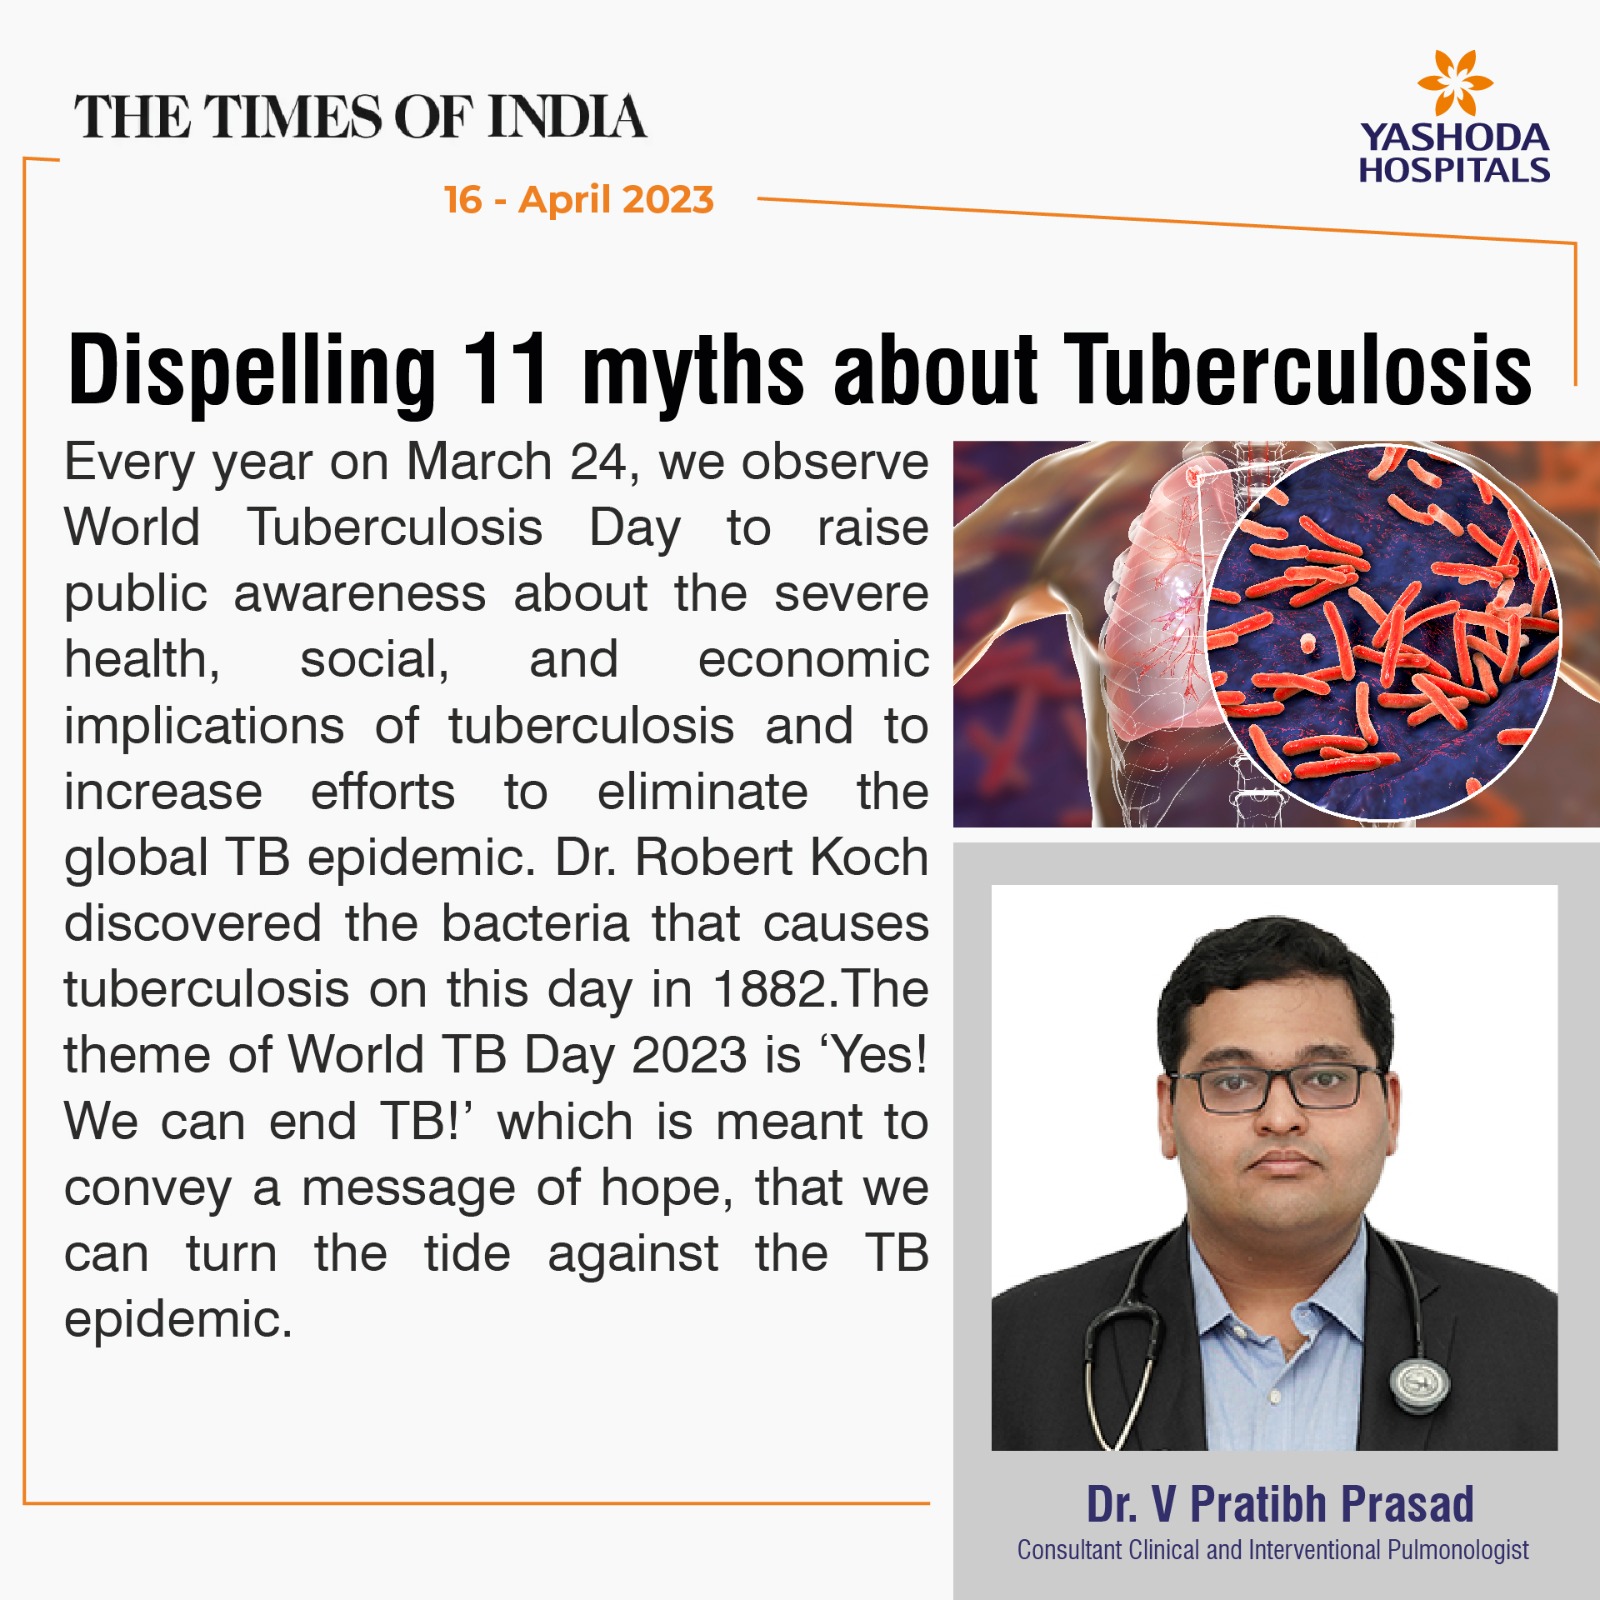 Dispelling 11 myths about Tuberculosis